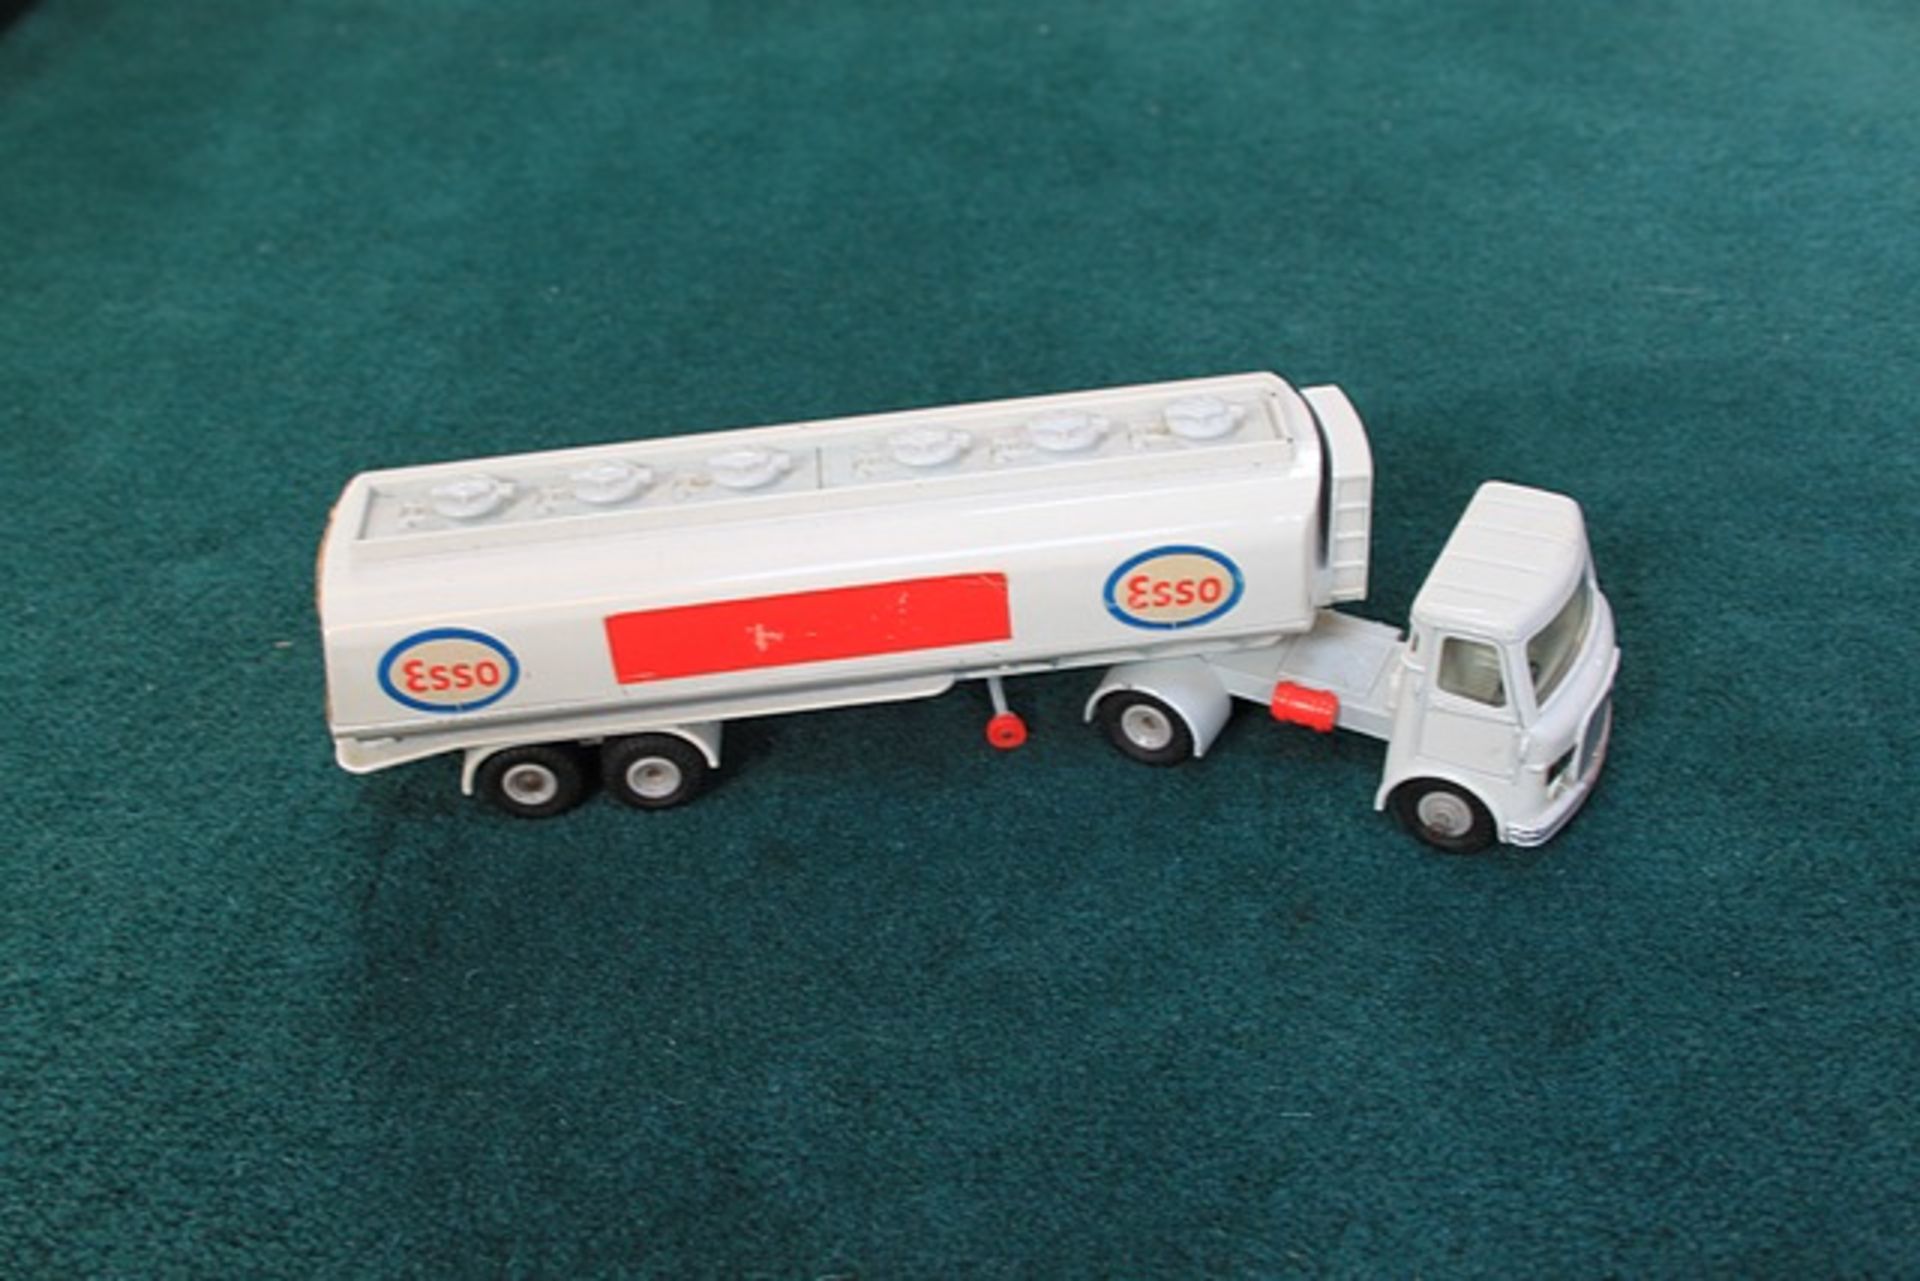 Dinky Toys # 945 Diecast A.E.C. Esso Fuel Tanker Complete With Box - Image 2 of 2